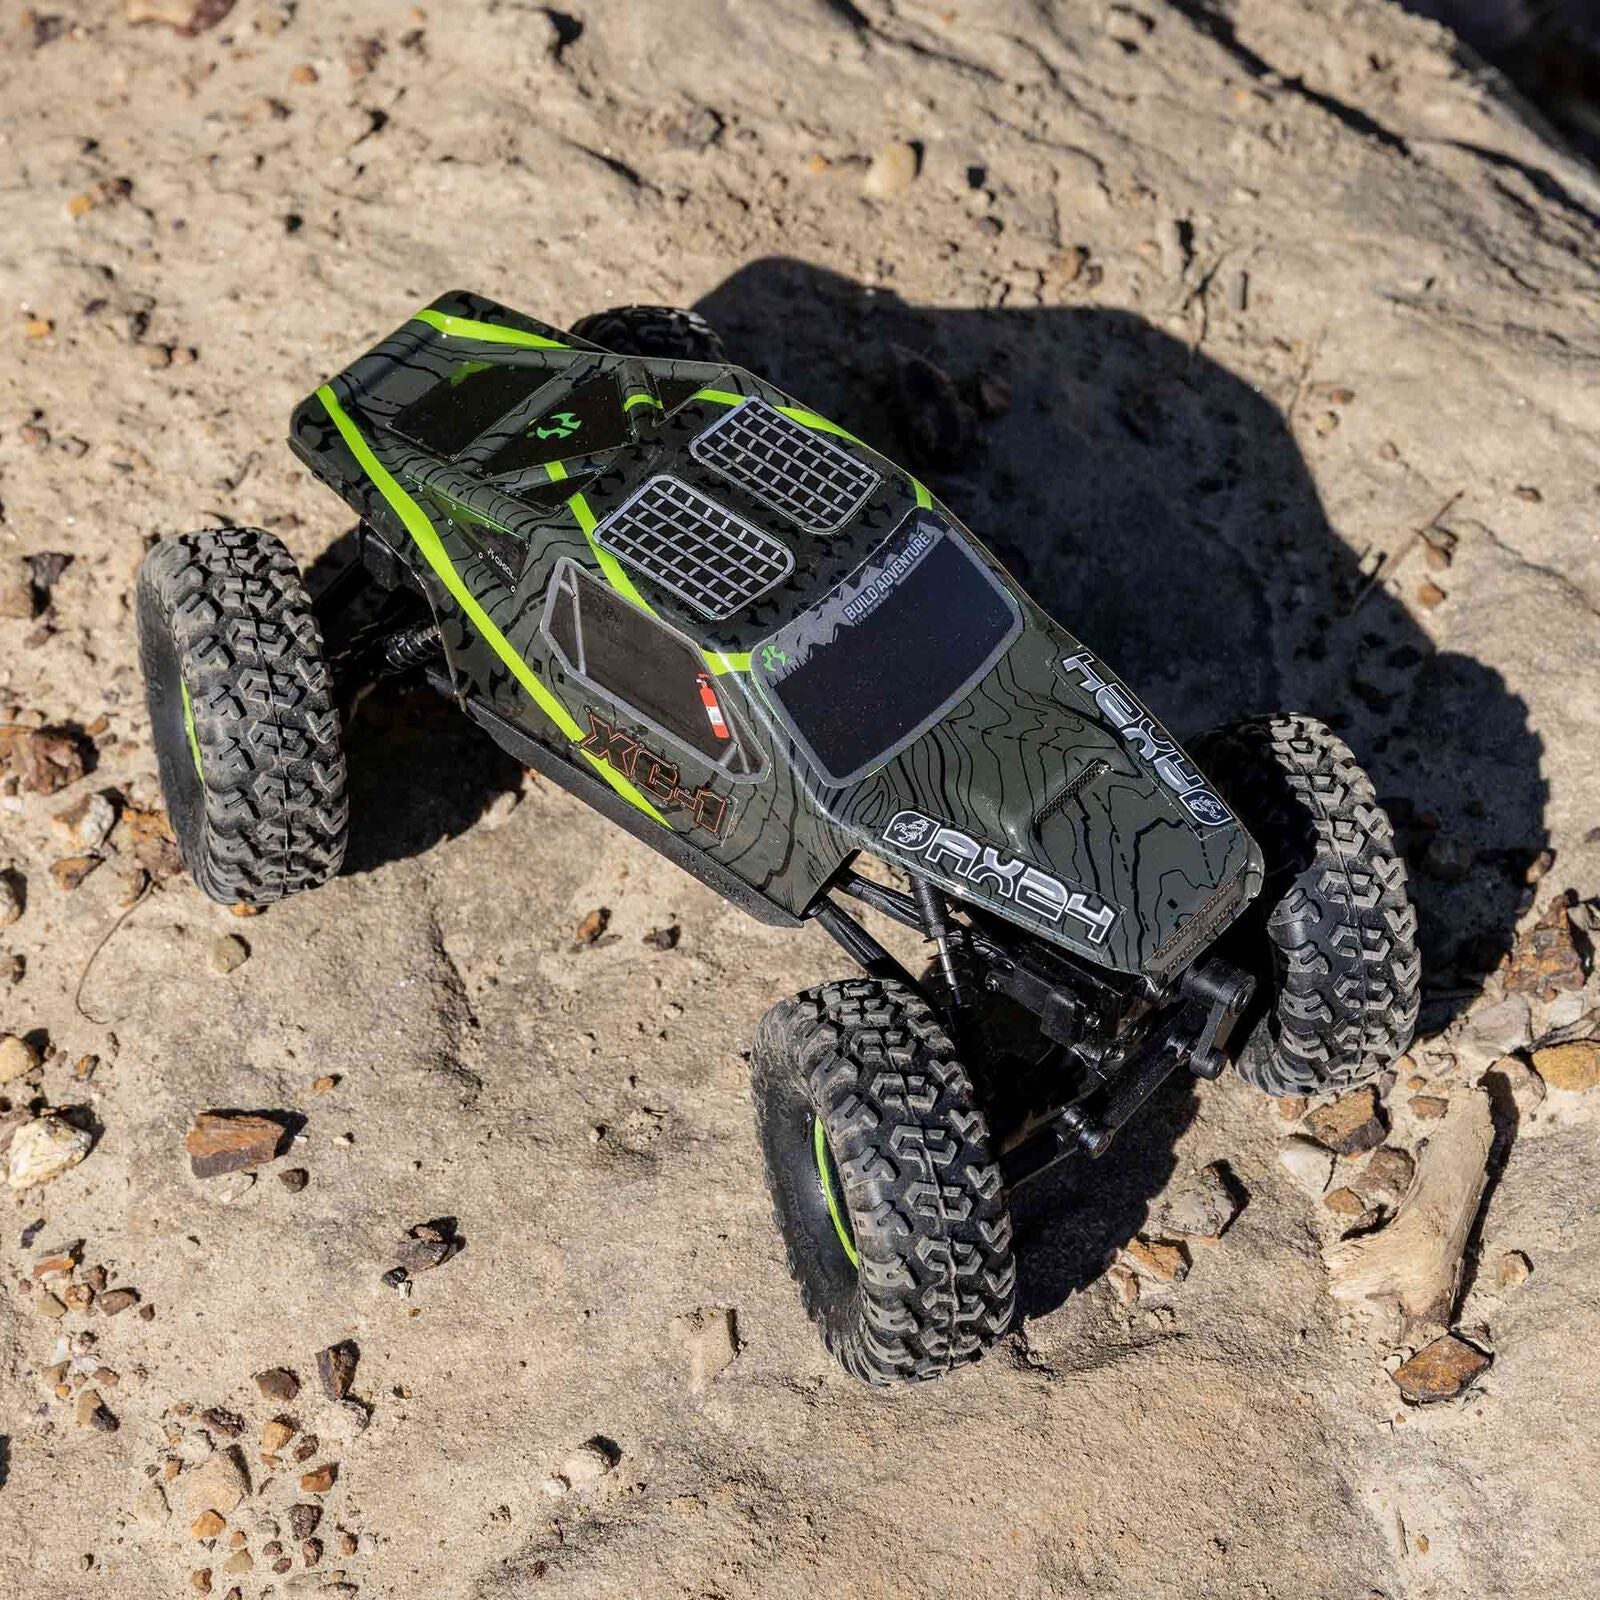 Axial 1/24 AX24 XC-1 4WS Crawler Brushed RTR - Green - HeliDirect